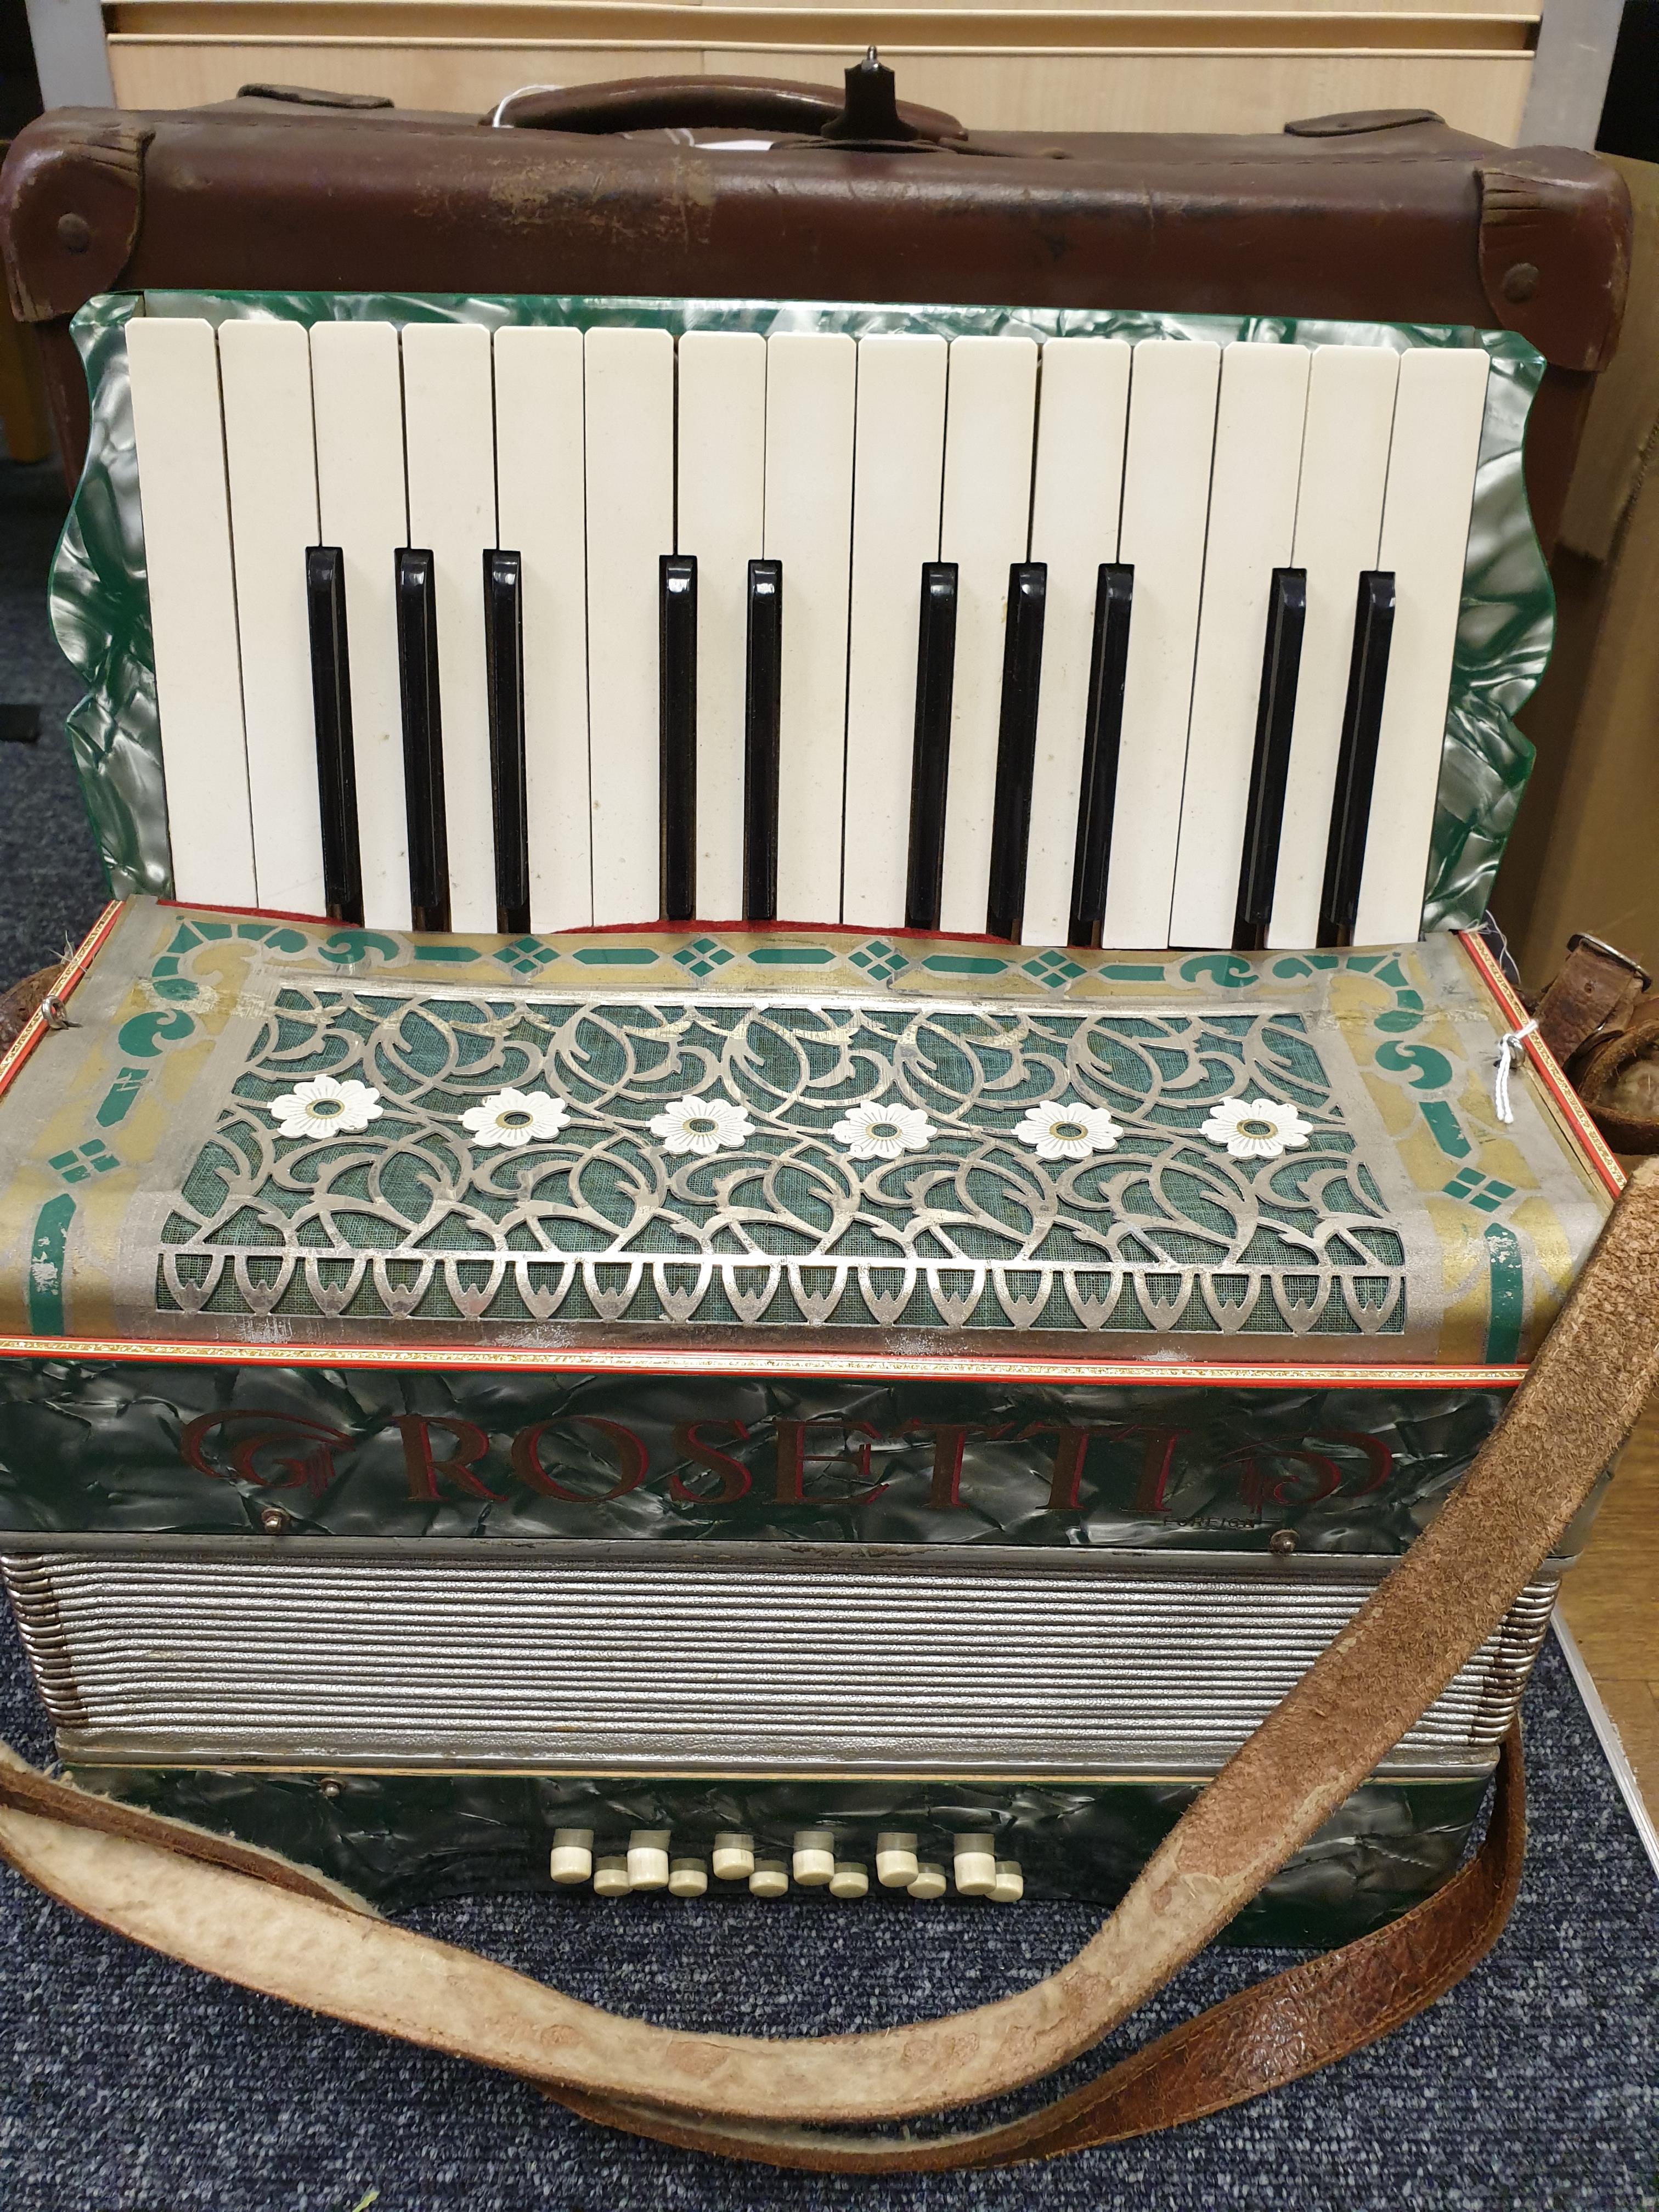 A Vintage 'Rosetts' Accordian, Bellows in good working order but one key needs a new spring, comes - Image 9 of 9